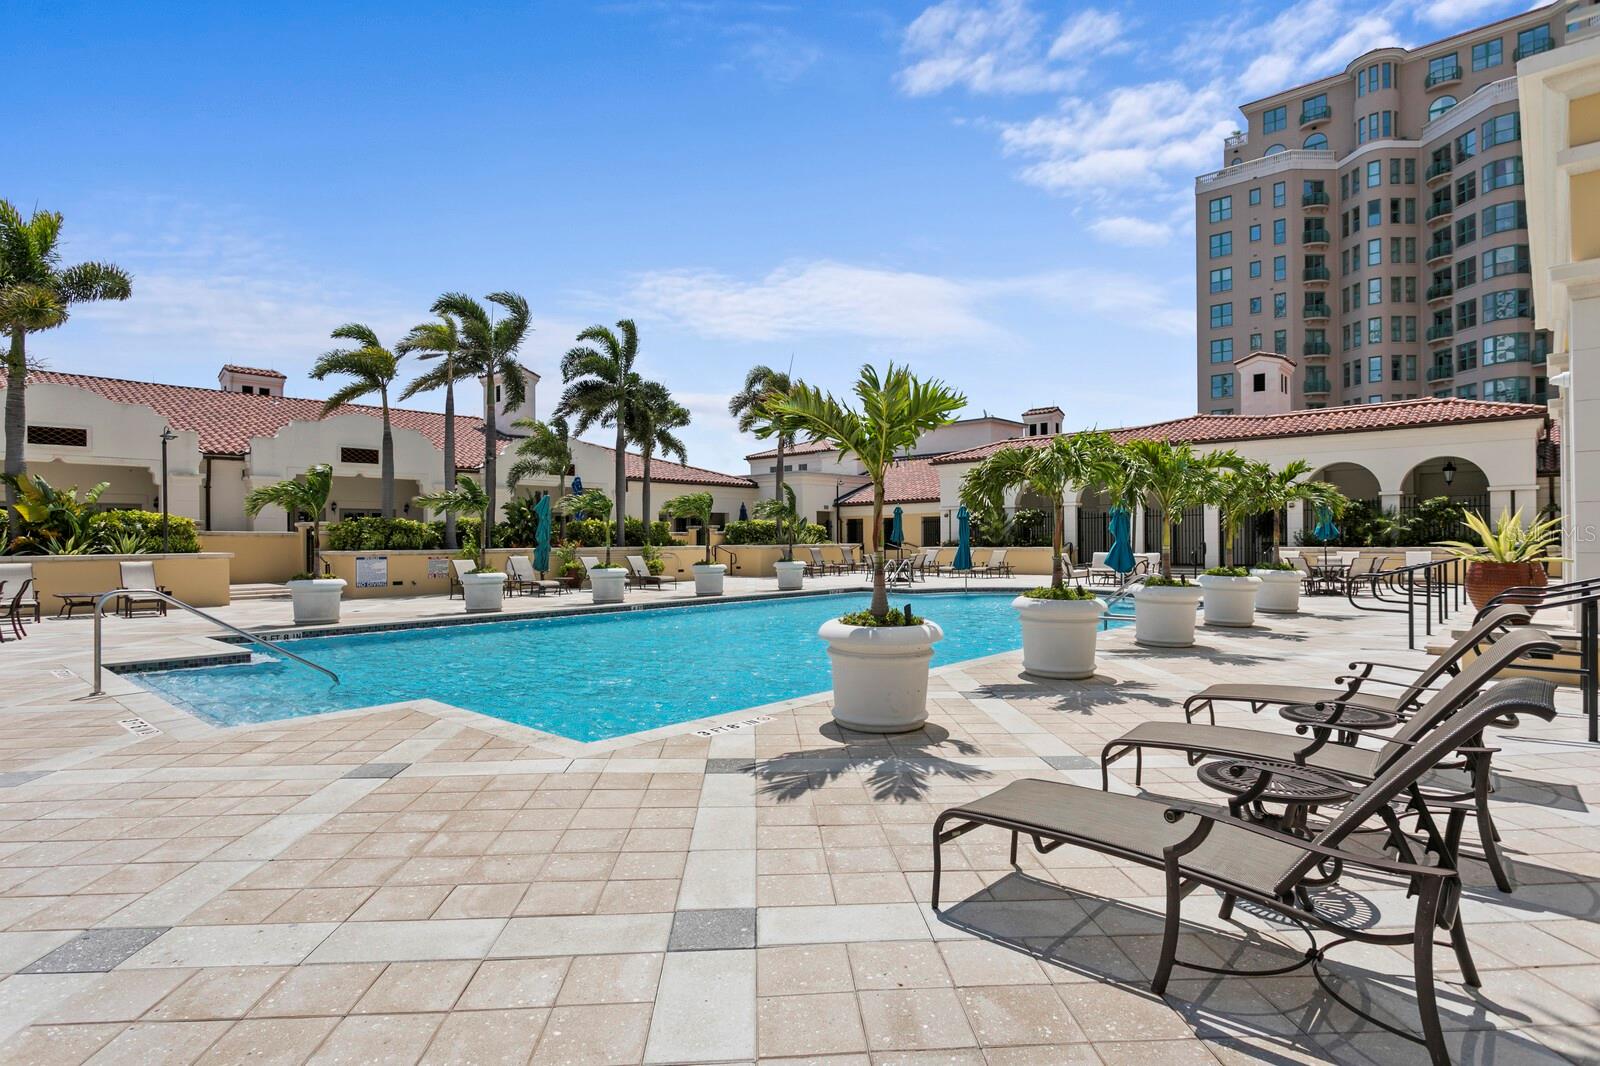 This Ritz Carlton pool is so amazing! Call Parkshore Grille and have your lunch delivered to the pool!